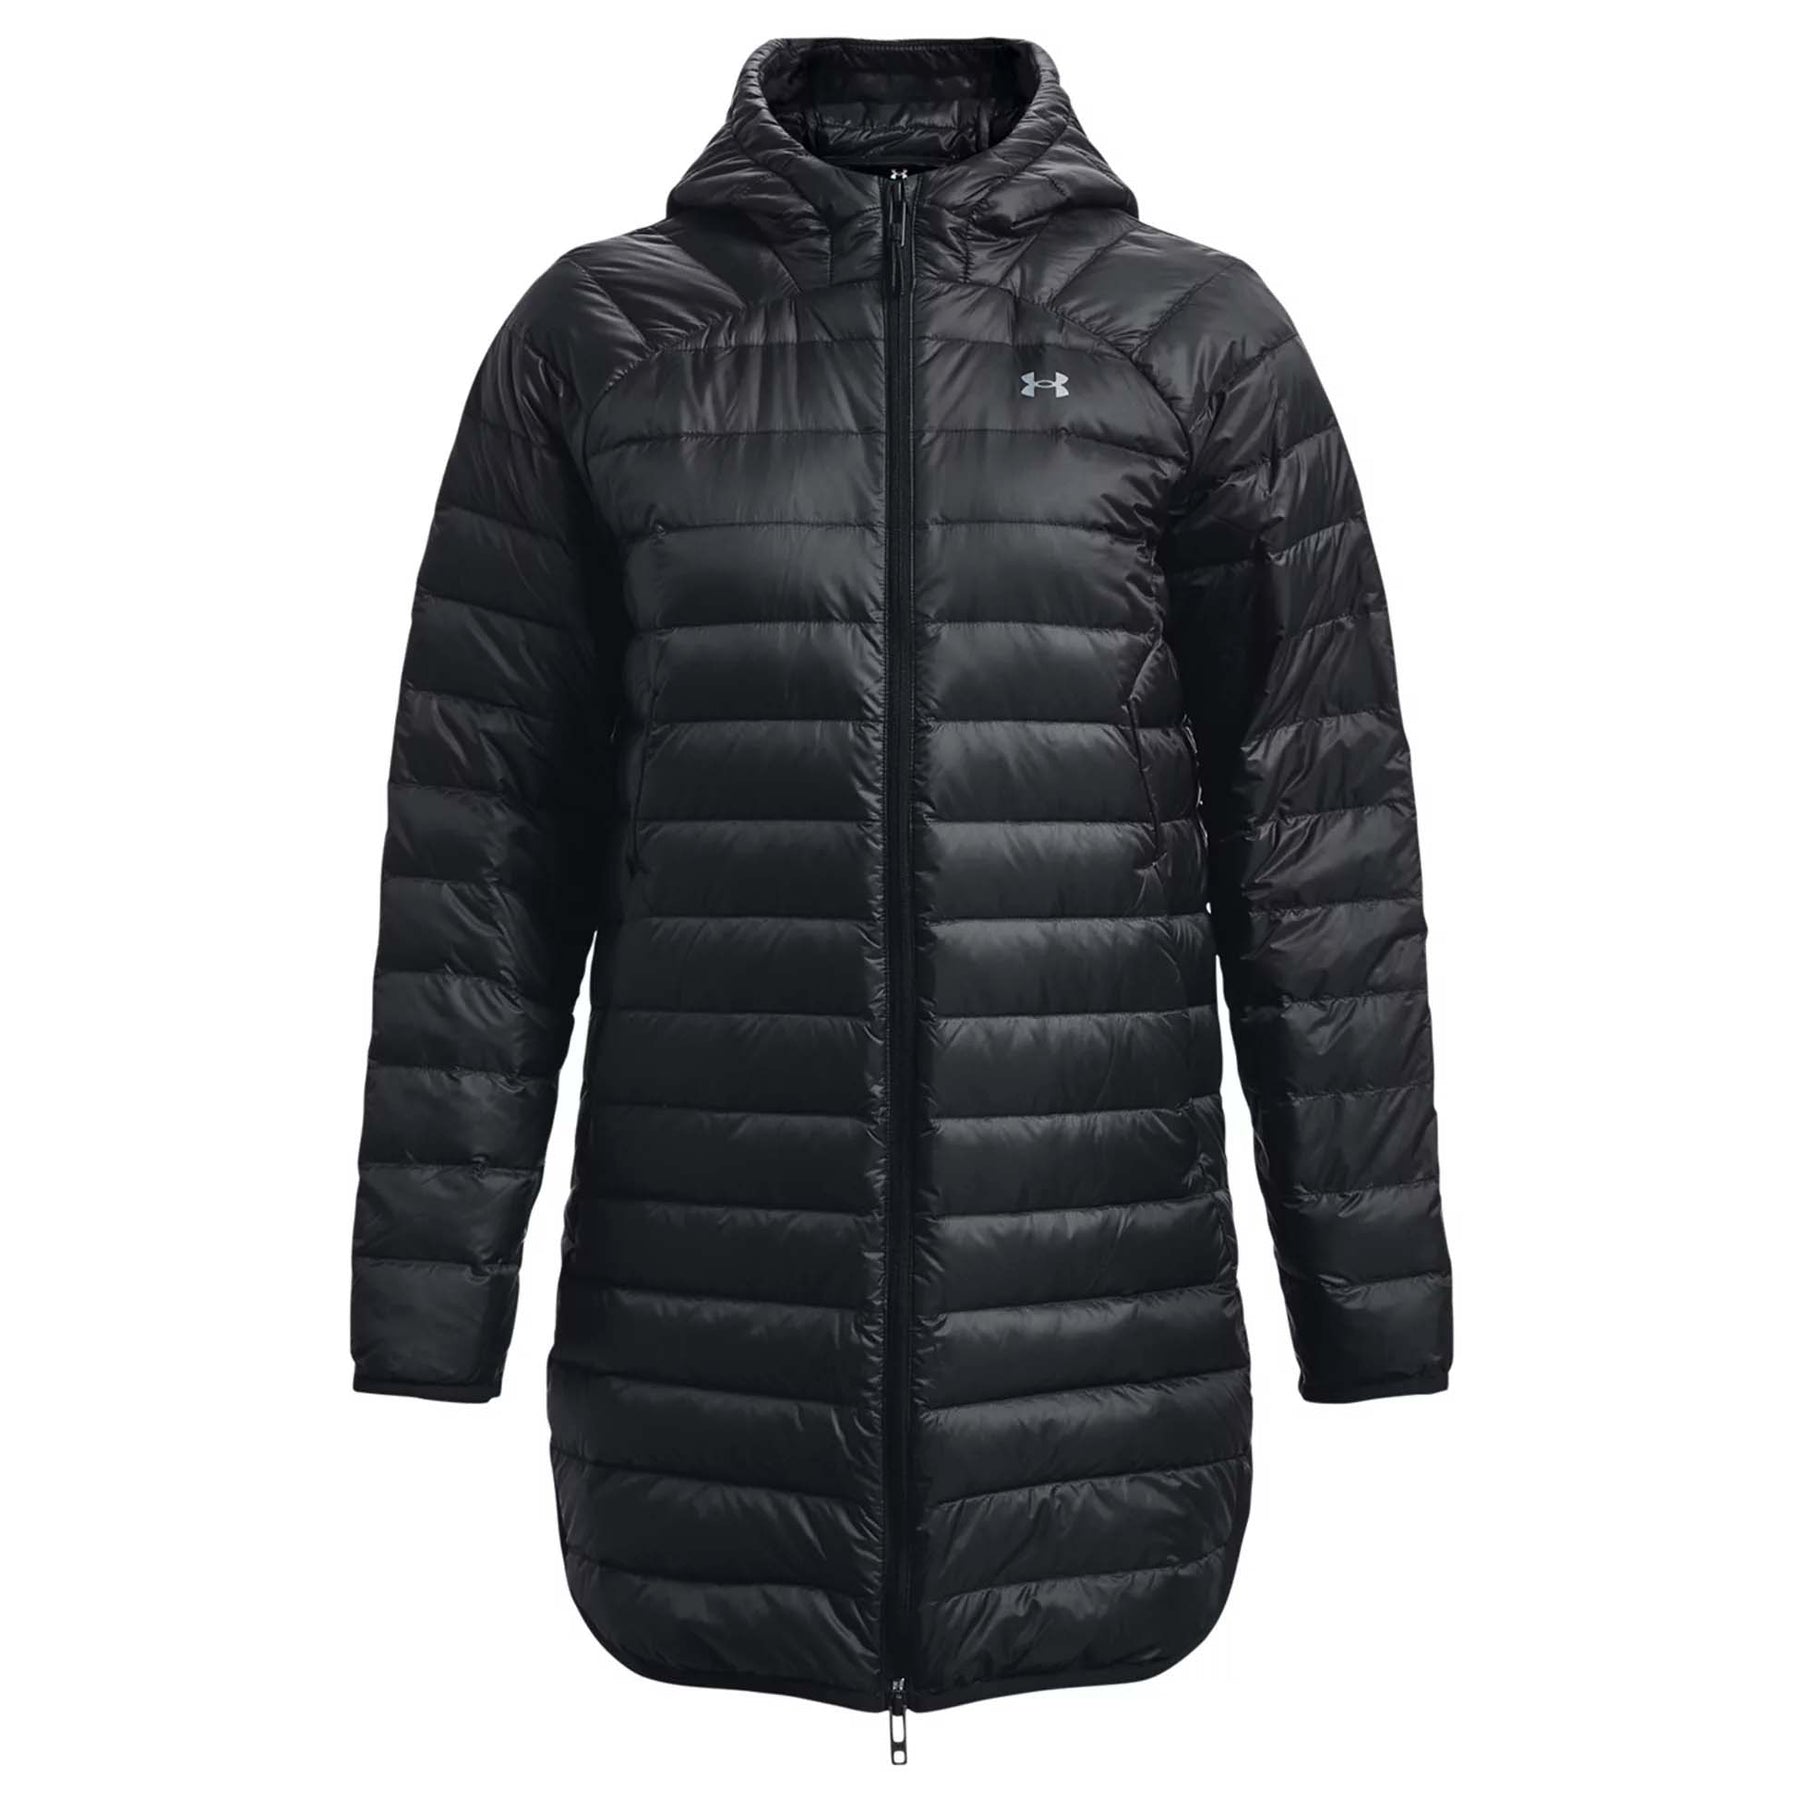 Under Armour Storm Armour Down 2.0 Womens Parka Jacket